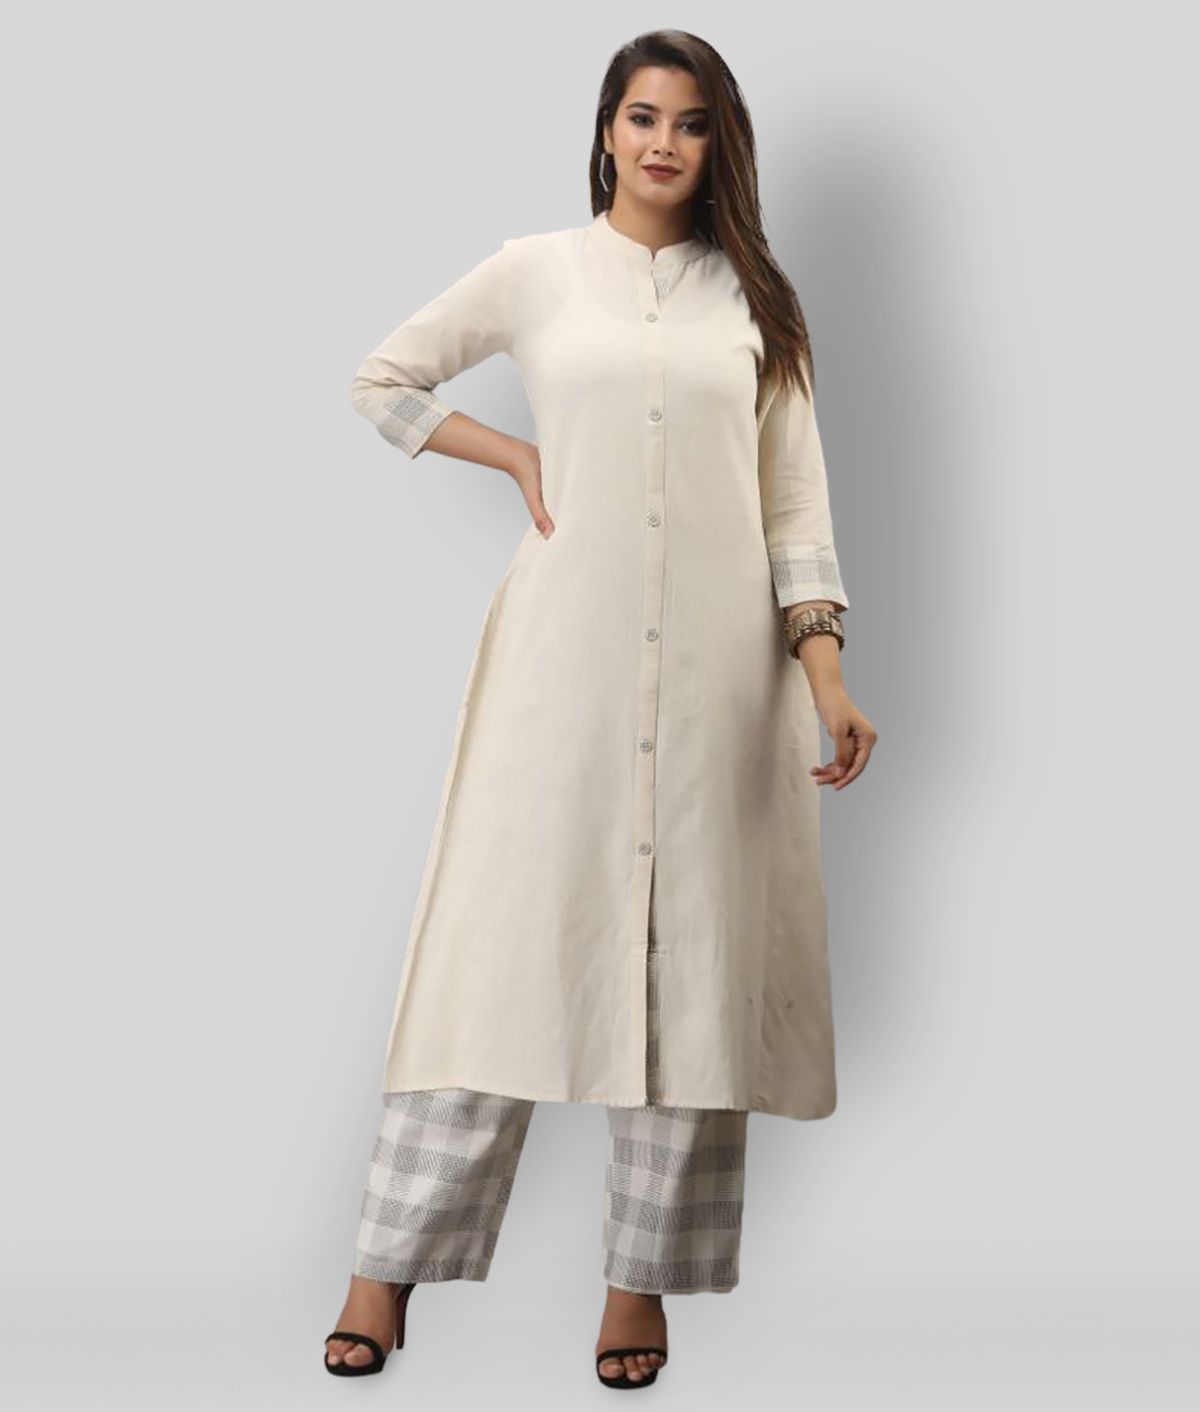     			MAUKA - White Front Slit Cotton Women's Stitched Salwar Suit ( Pack of 1 )